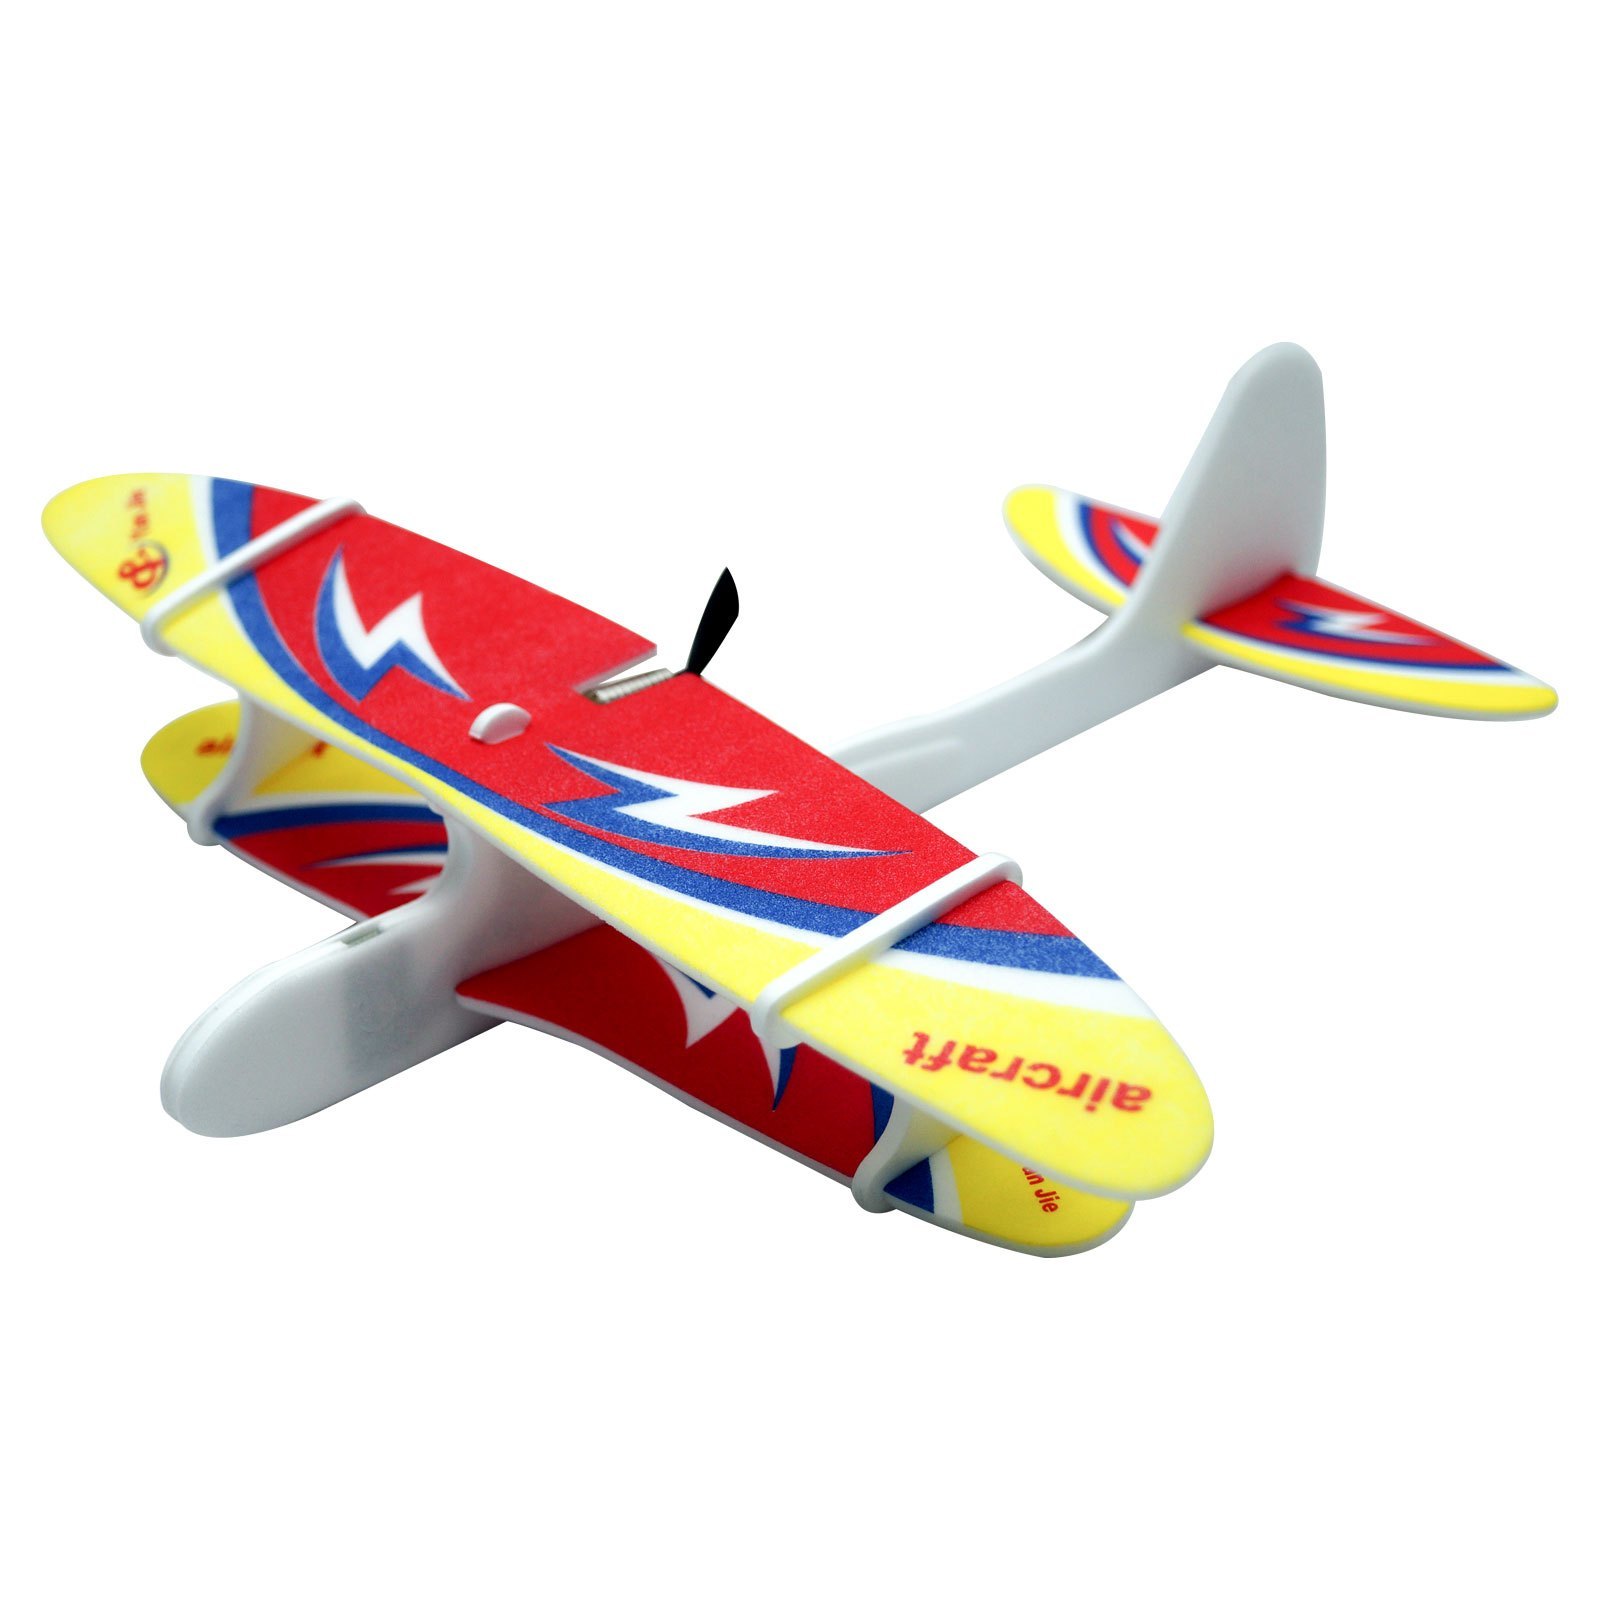 Buy GoodEase Yan Jie Aircraft Plane Toy For Kids Online @ ₹446 from ...